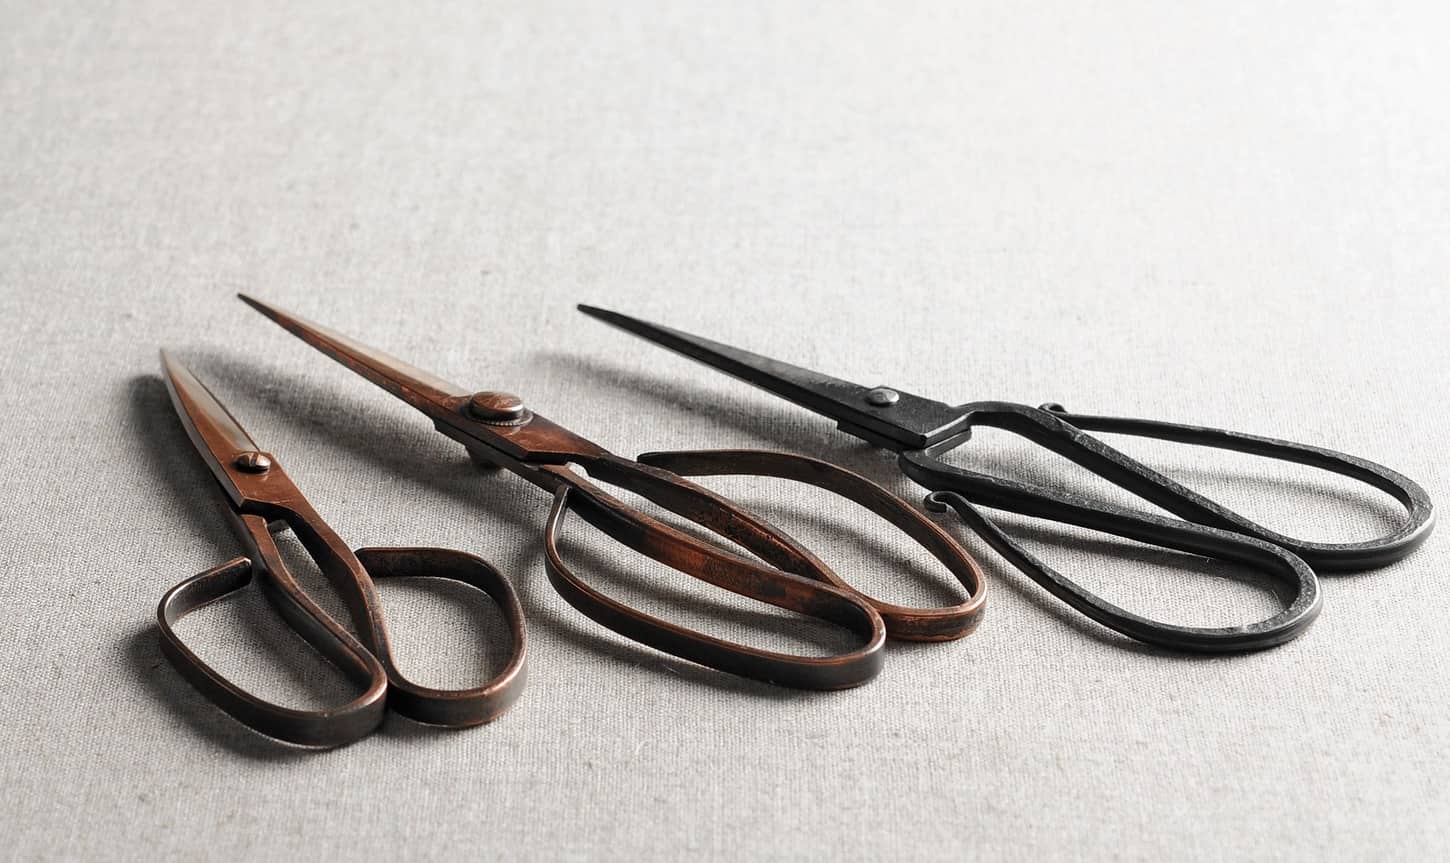 Three pairs of rustic looking Japanese scissors laying on a piece of light grey cloth